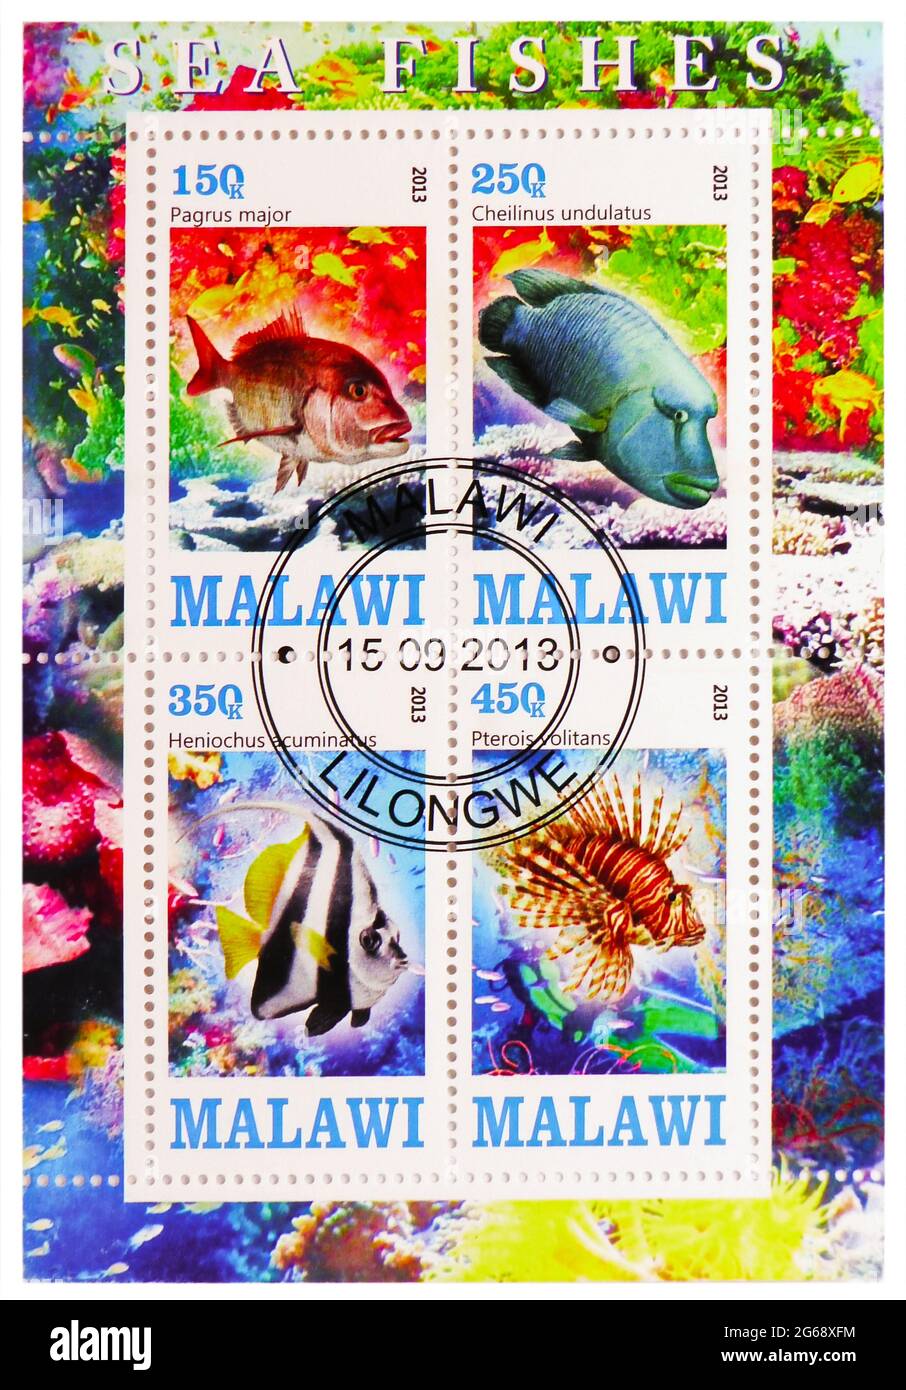 MOSCOW, RUSSIA - MARCH 28, 2020: Four postage stamps printed in Malawi shows Sea fishes serie, circa 2013 Stock Photo